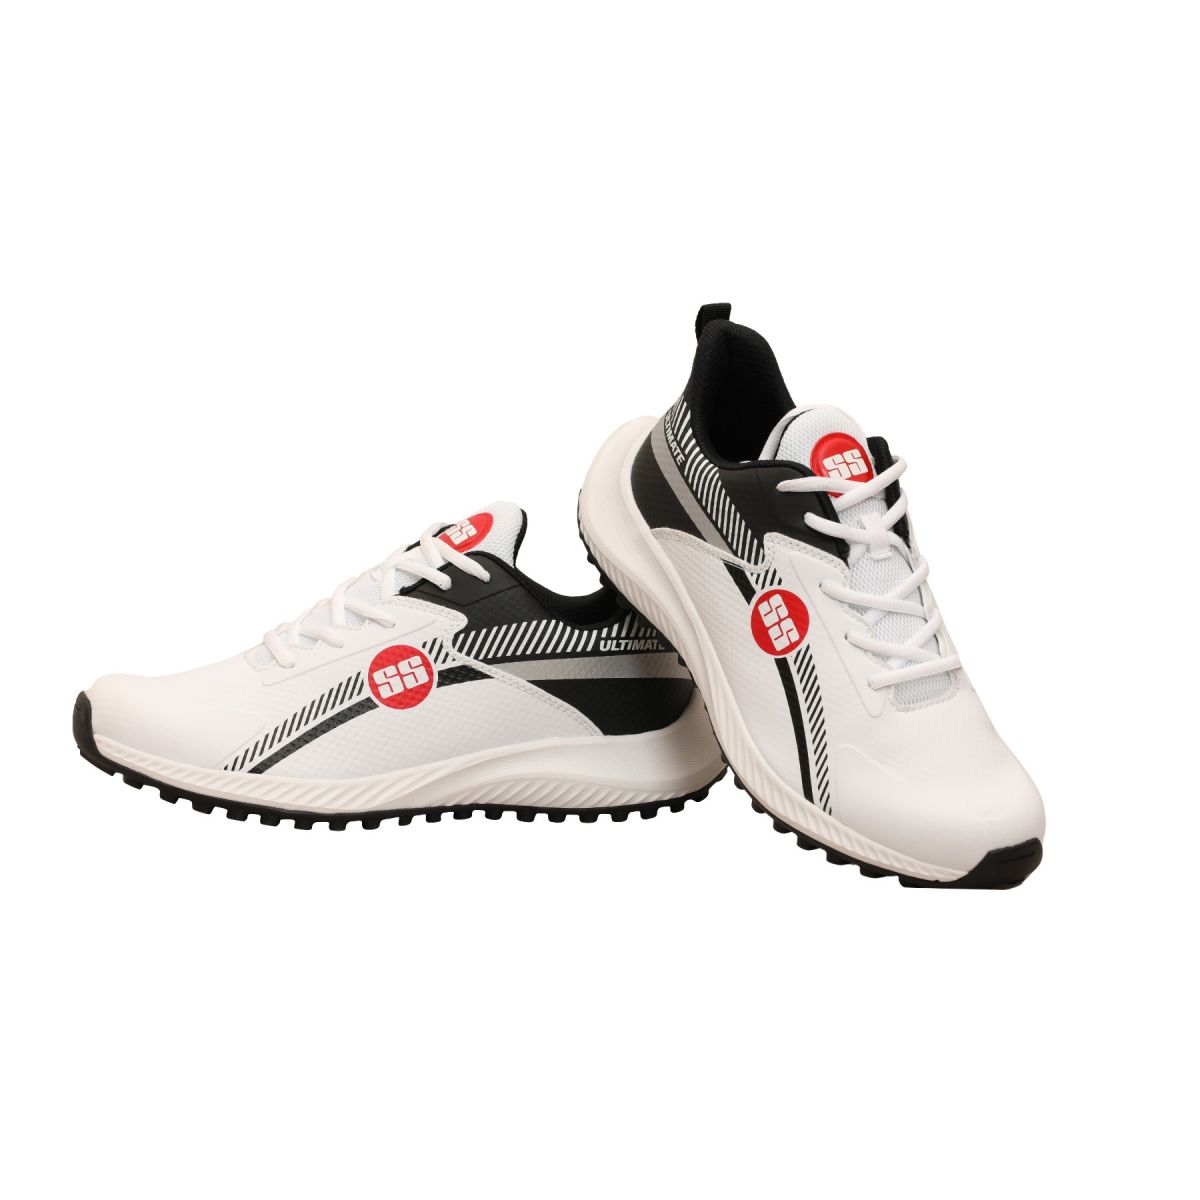 SS/TON rubber nob cricket shoes now in... - The Cricket Store | Facebook